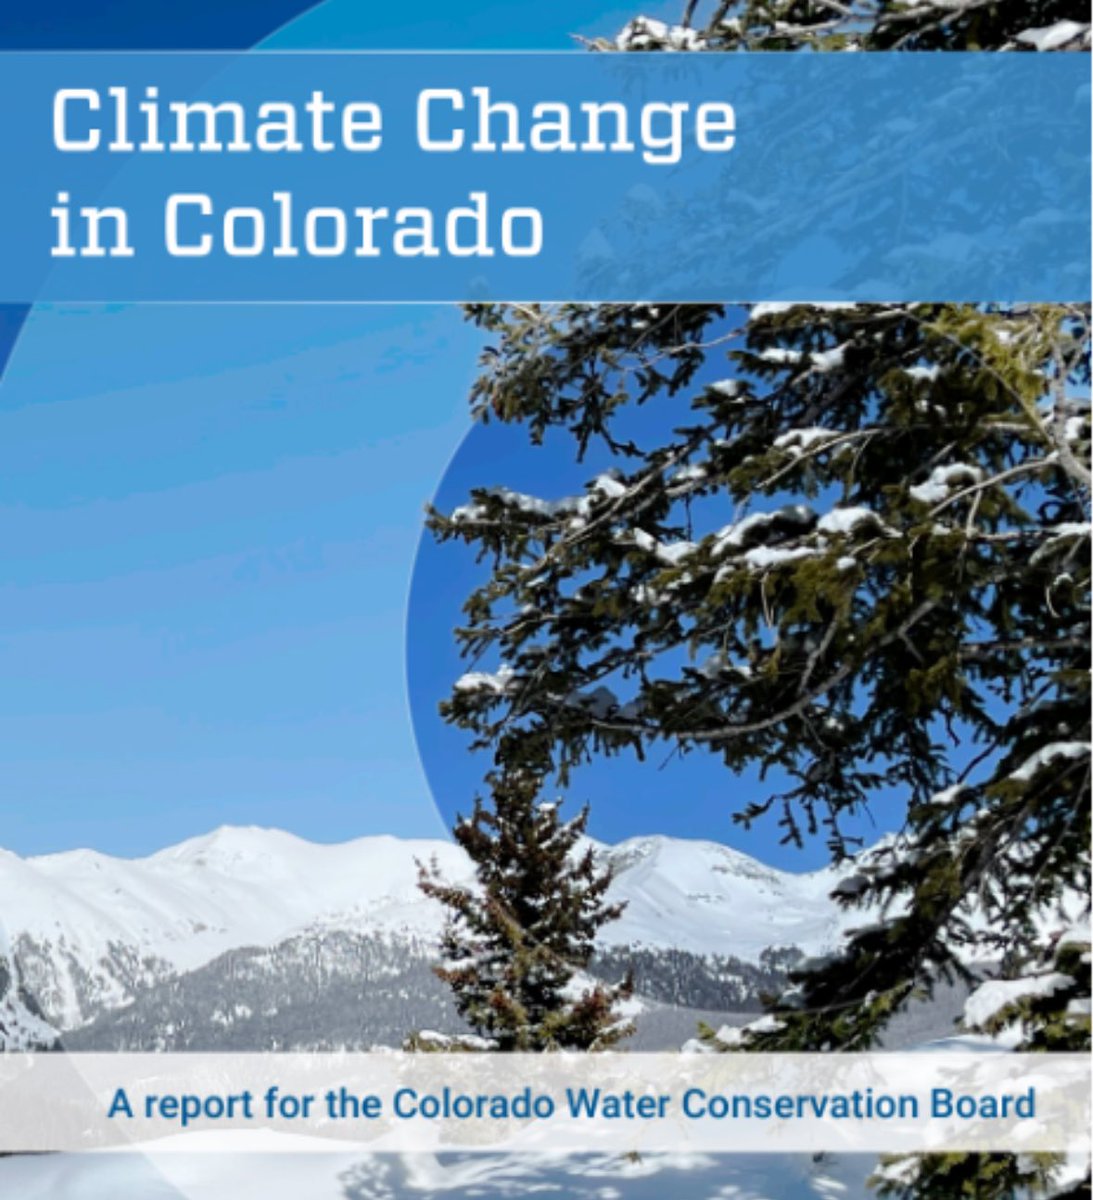 NC CASC Social Science and Climate Science Leads, Heather Yocum and Imtiaz Rangwala, reviewed and contributed to a new report on climate change in Colorado. Learn more here: nccasc.colorado.edu/news/new-repor…

#climate #colorado #climatetwitter #climatechange